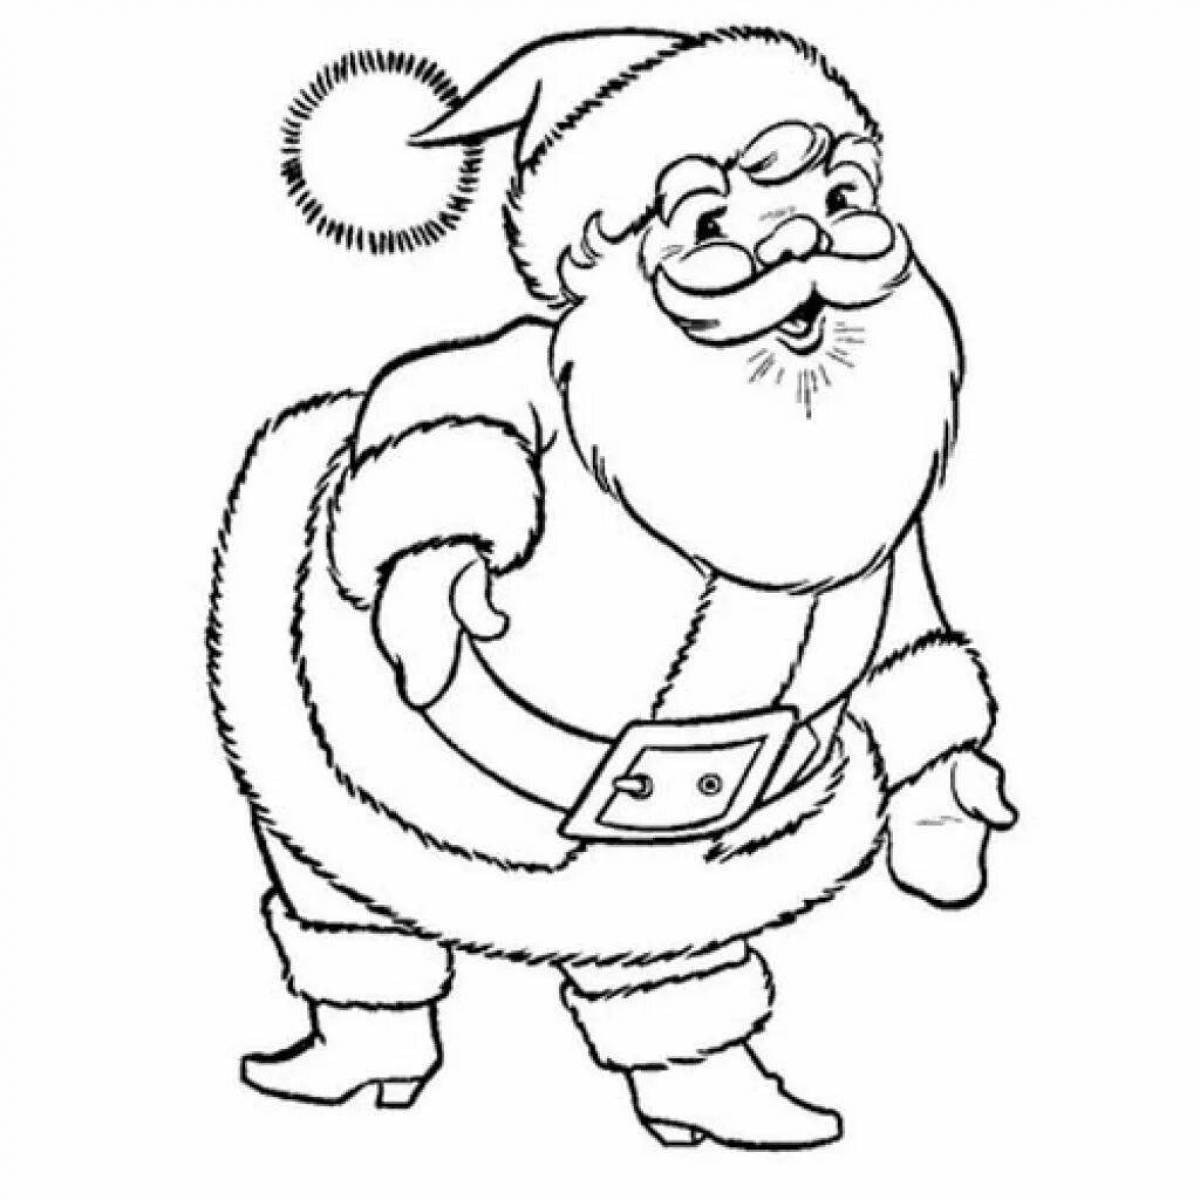 Coloring page cheerful little santa claus